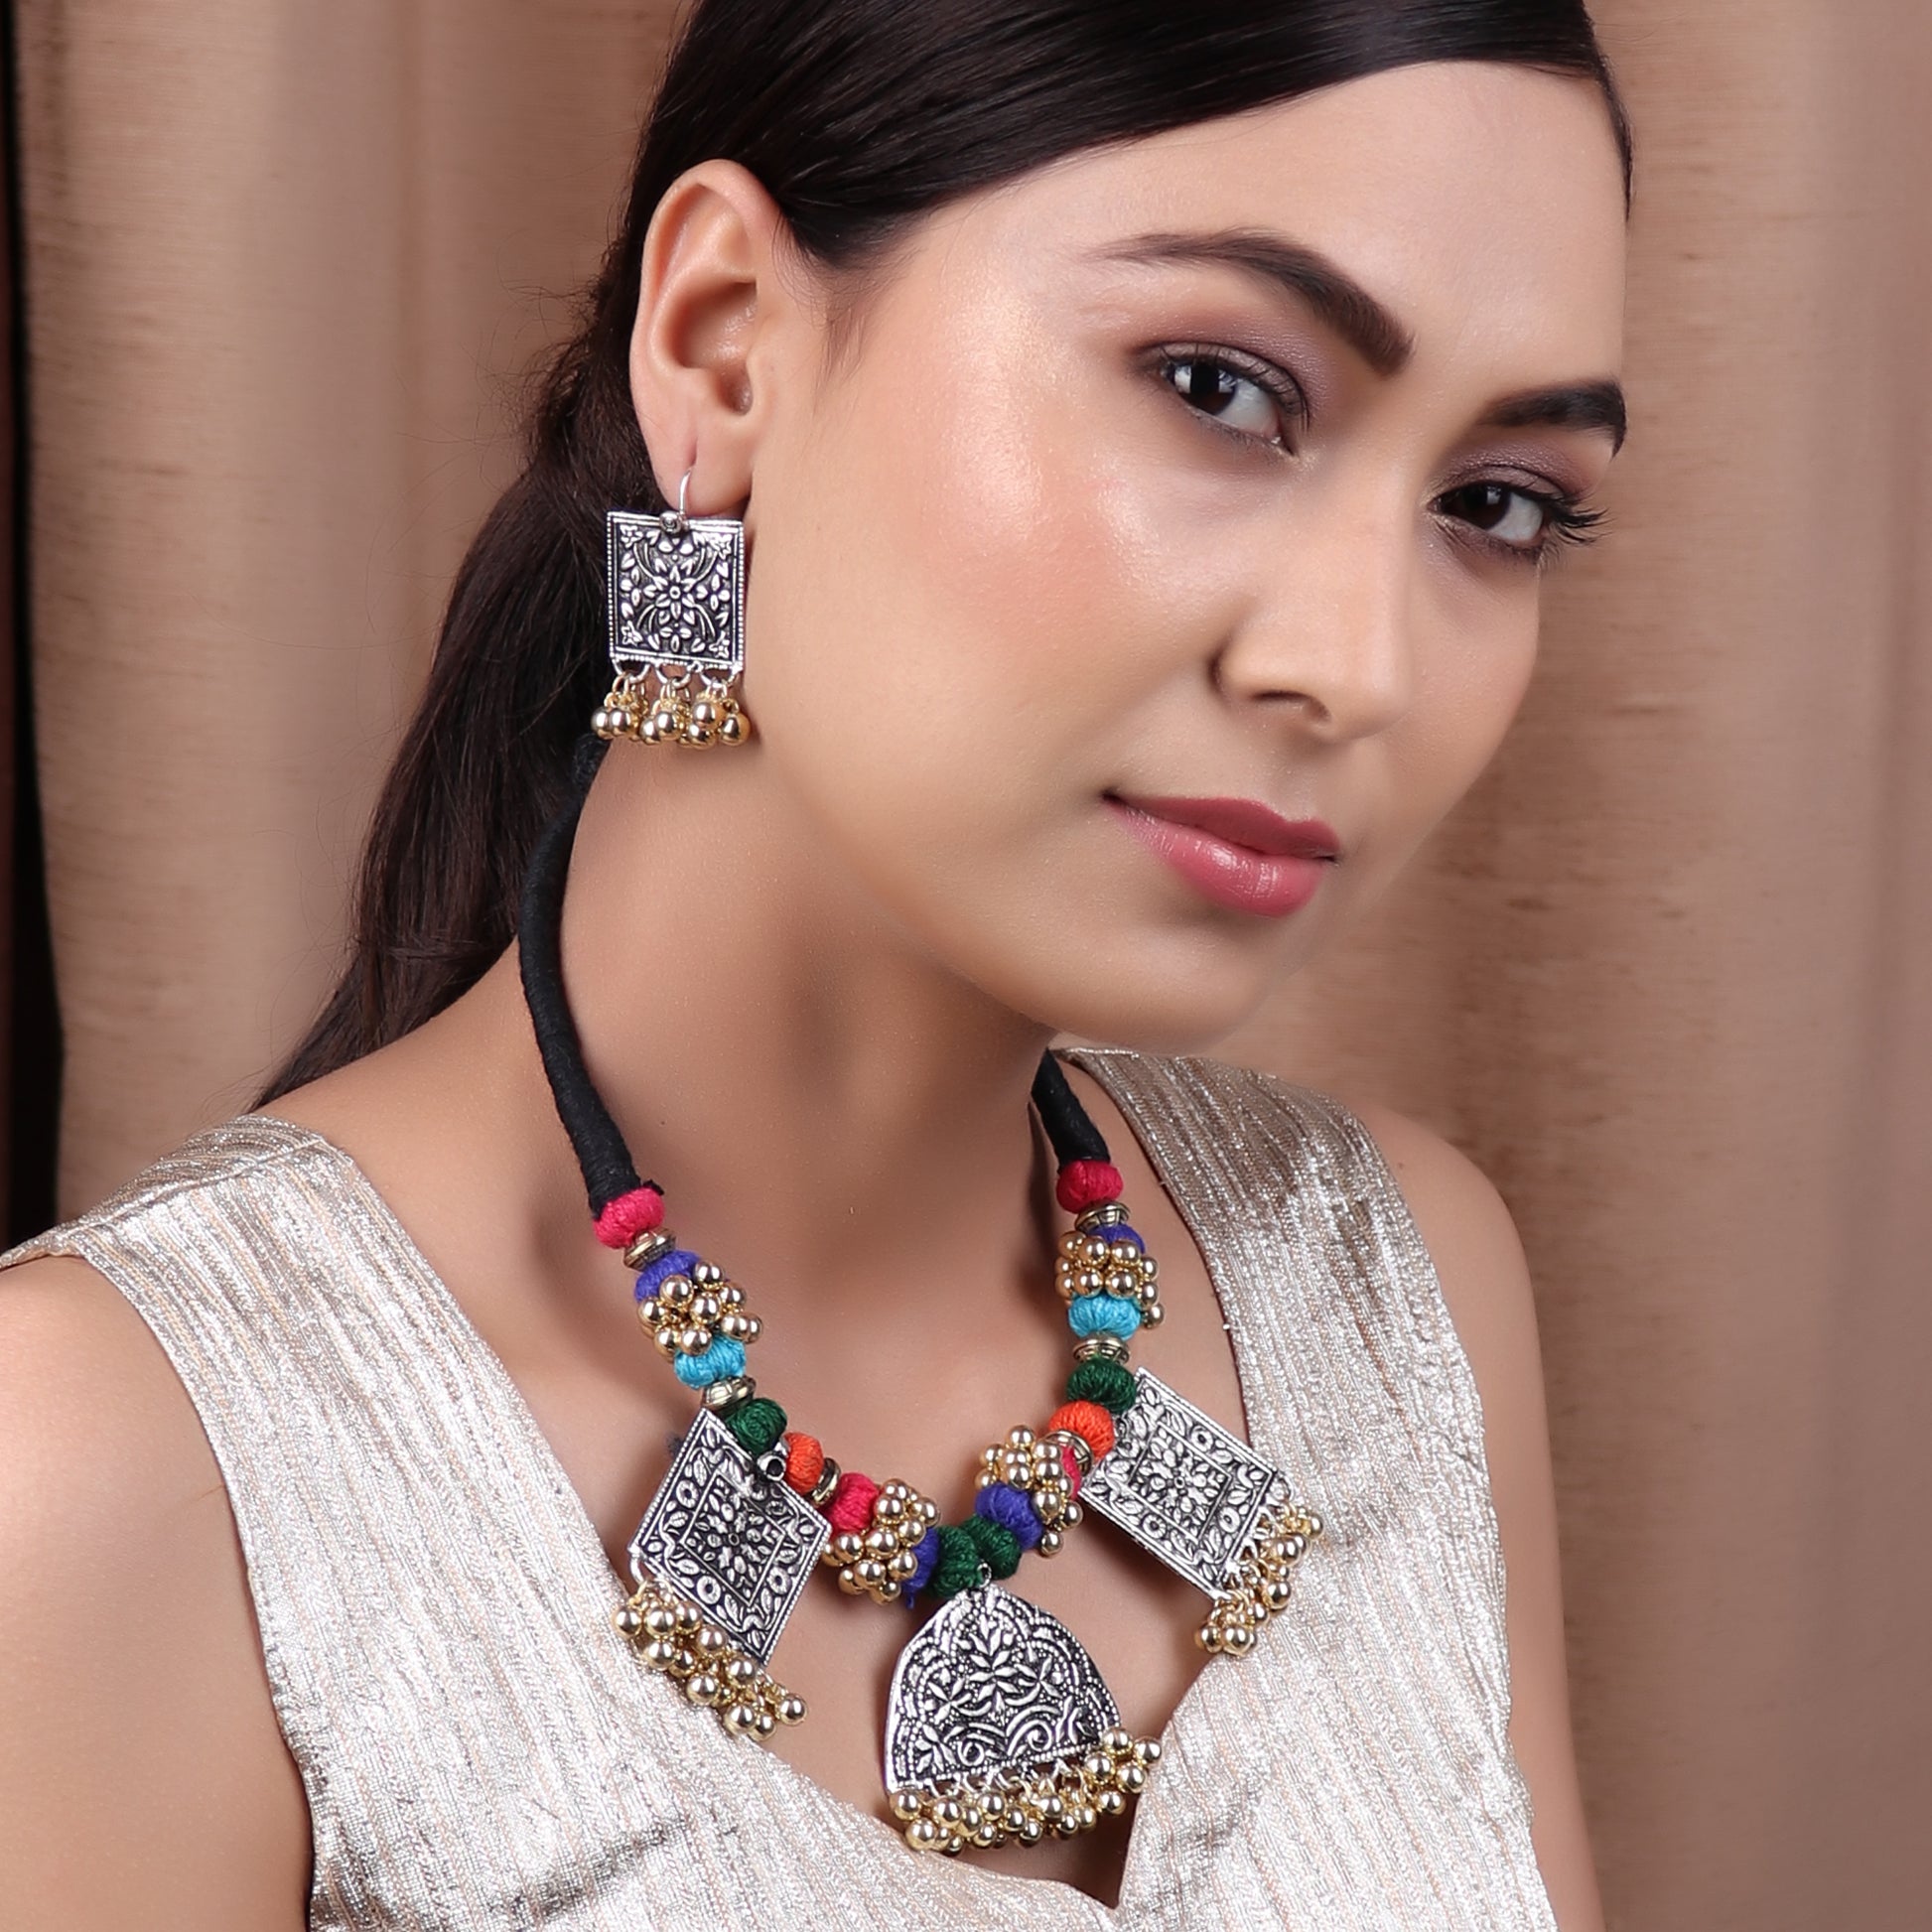 Necklace Set,The Cheerful Necklace Set in Multicolor Thread - Cippele Multi Store